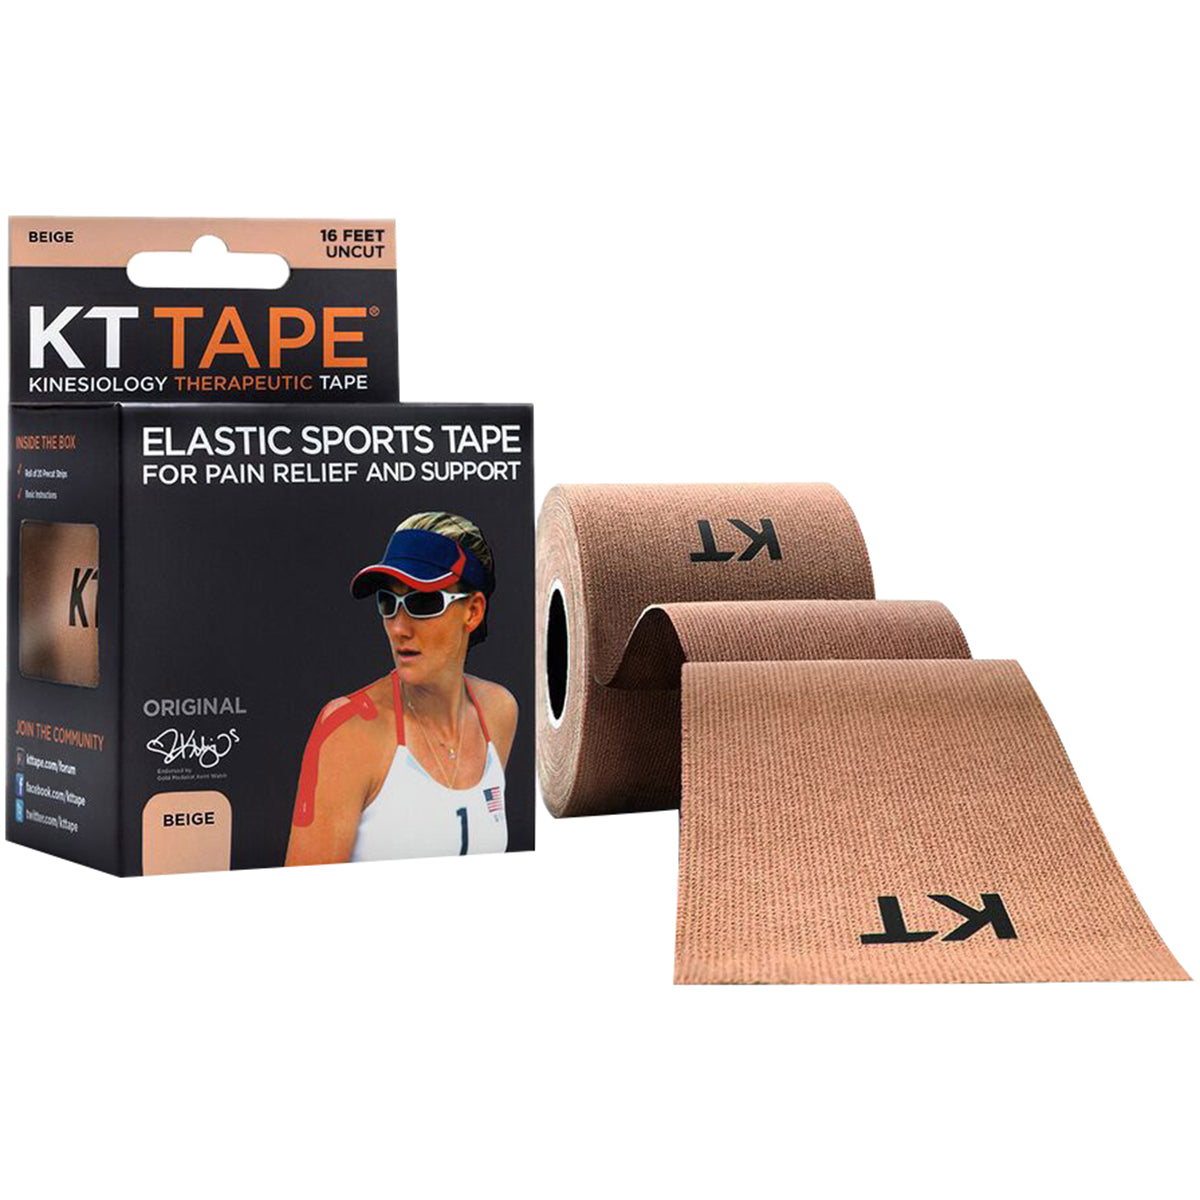 KT Tape Cotton 16 ft Uncut Kinesiology Therapeutic Elastic Sports Roll - Beige KT Tape